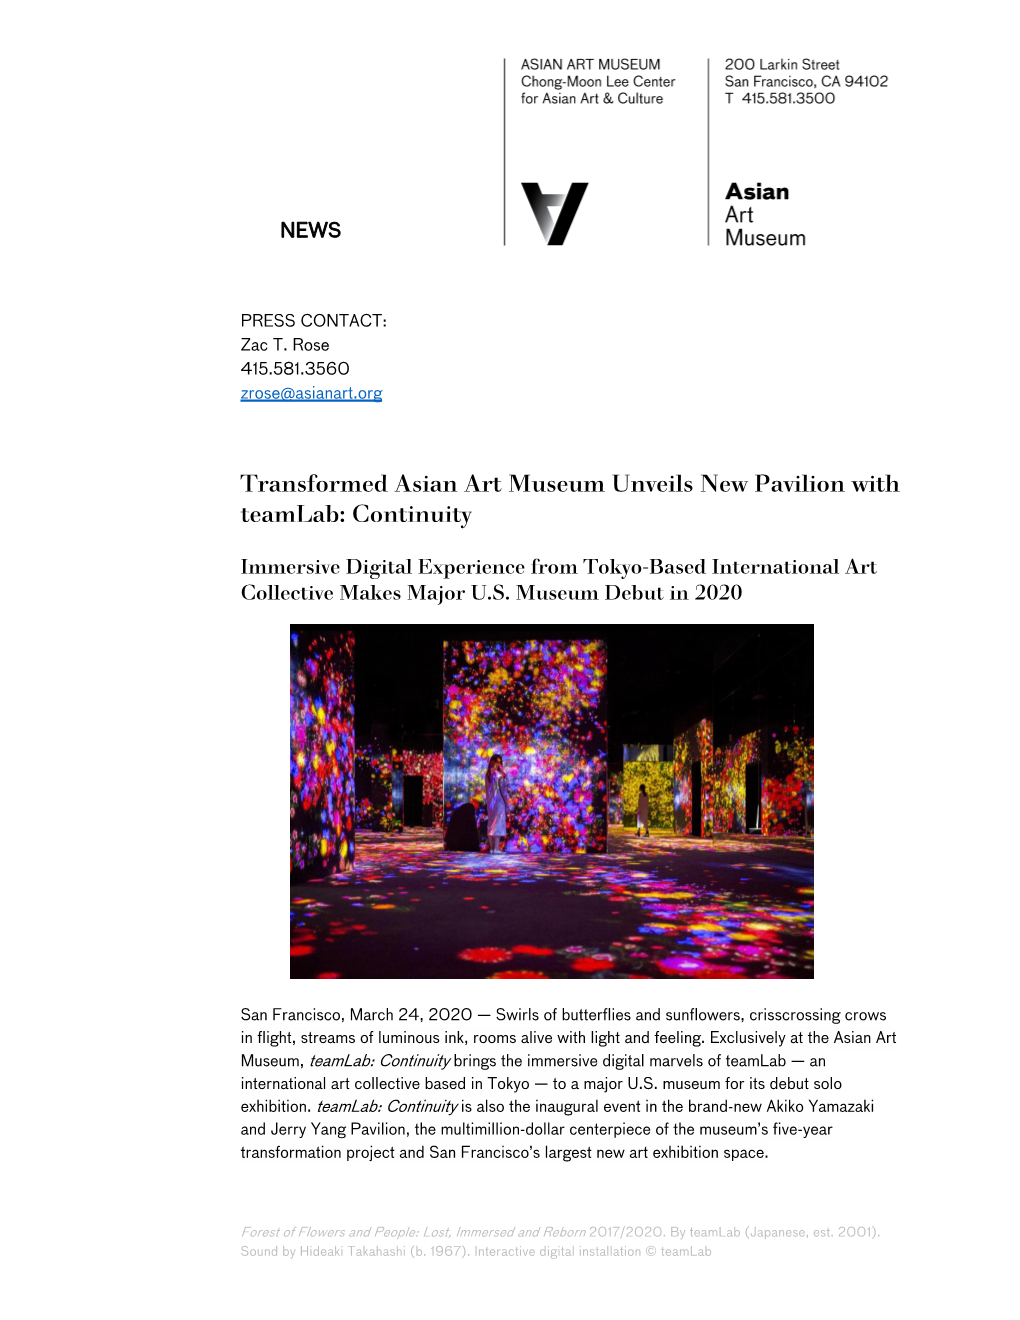 Transformed Asian Art Museum Unveils New Pavilion with Teamlab: Continuity